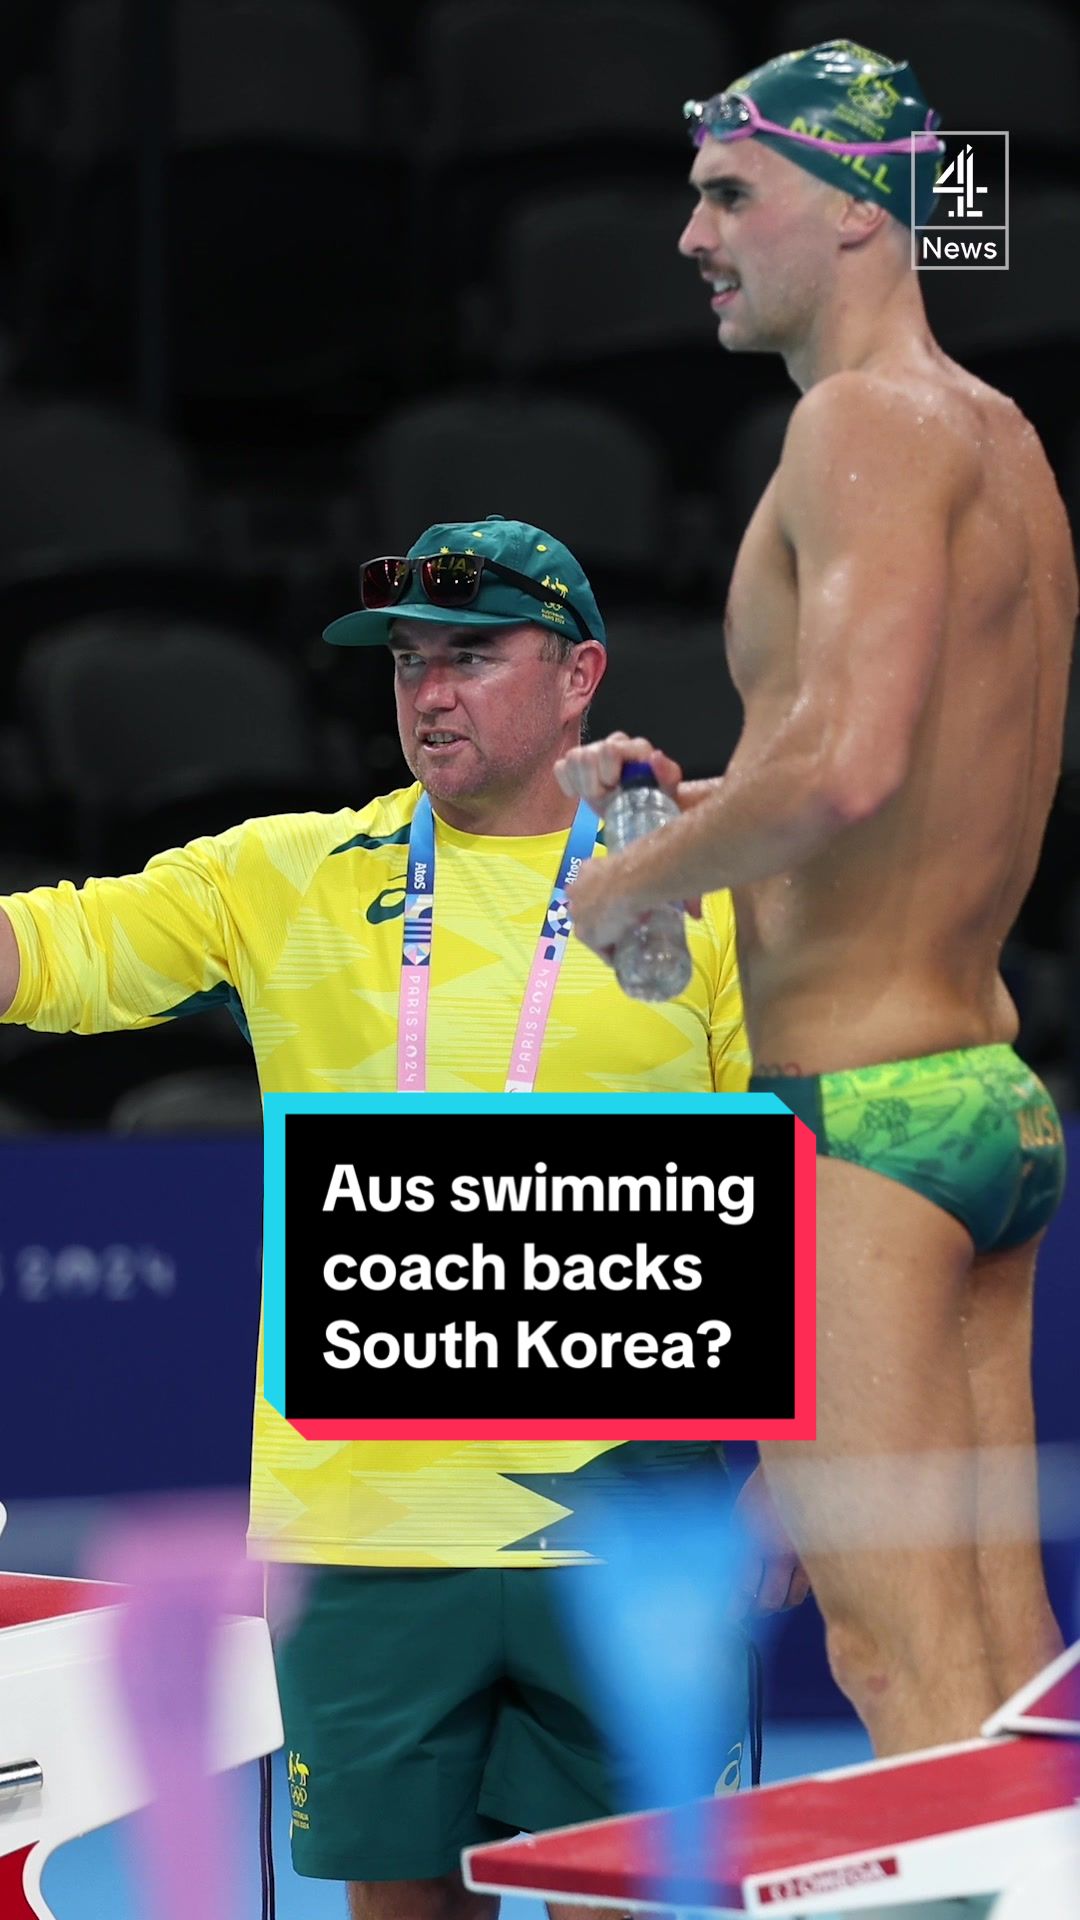 An Australian Olympic swimming coach has said he hopes a Korean swimmer - who he used to train - will win gold. And now he could be sent home from the games in Paris. #Australia #Swimming #Olympics #Korea #Sport #News #Channel4News